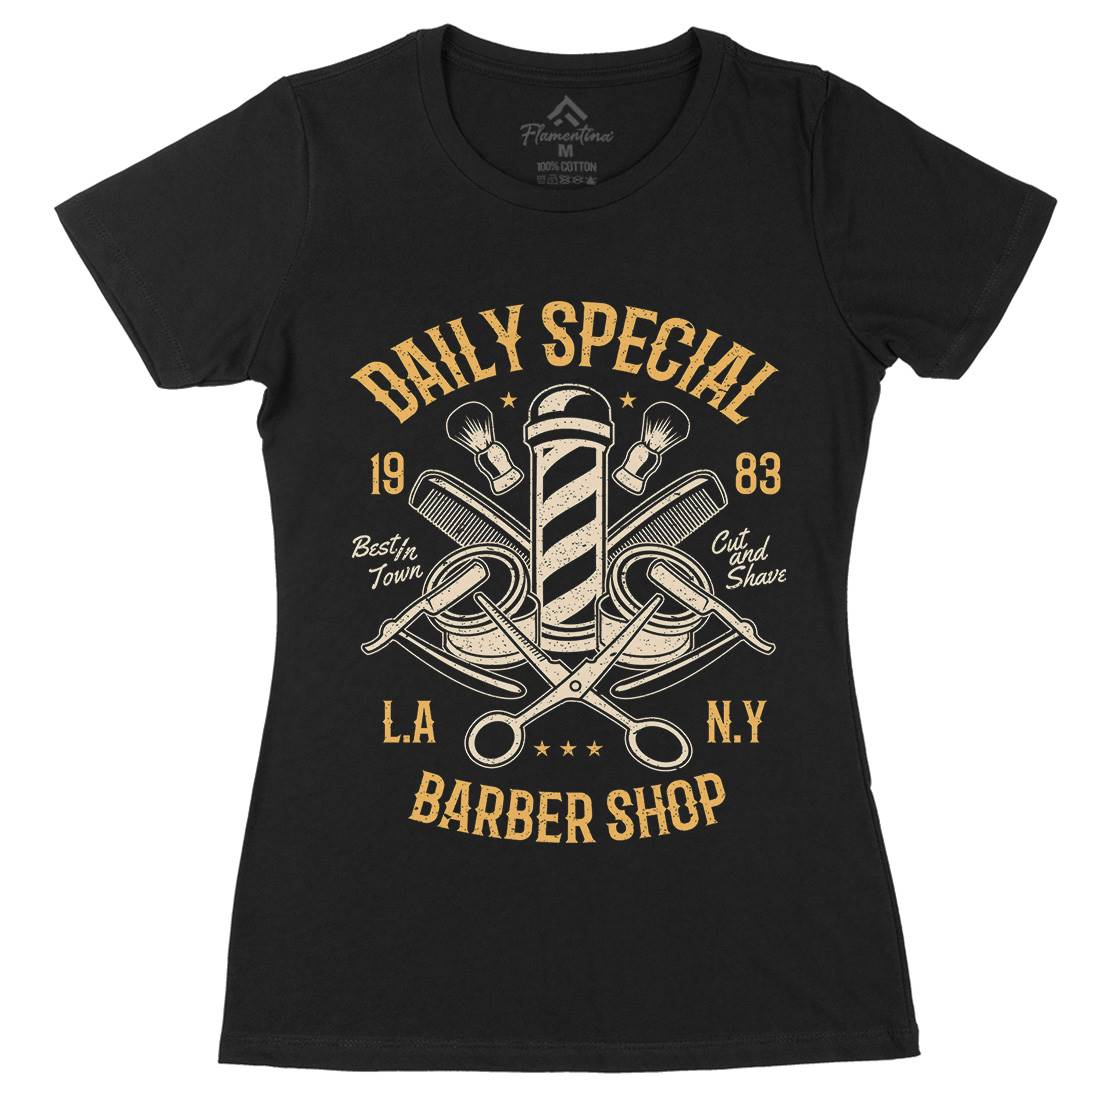 Daily Special Shop Womens Organic Crew Neck T-Shirt Barber A041